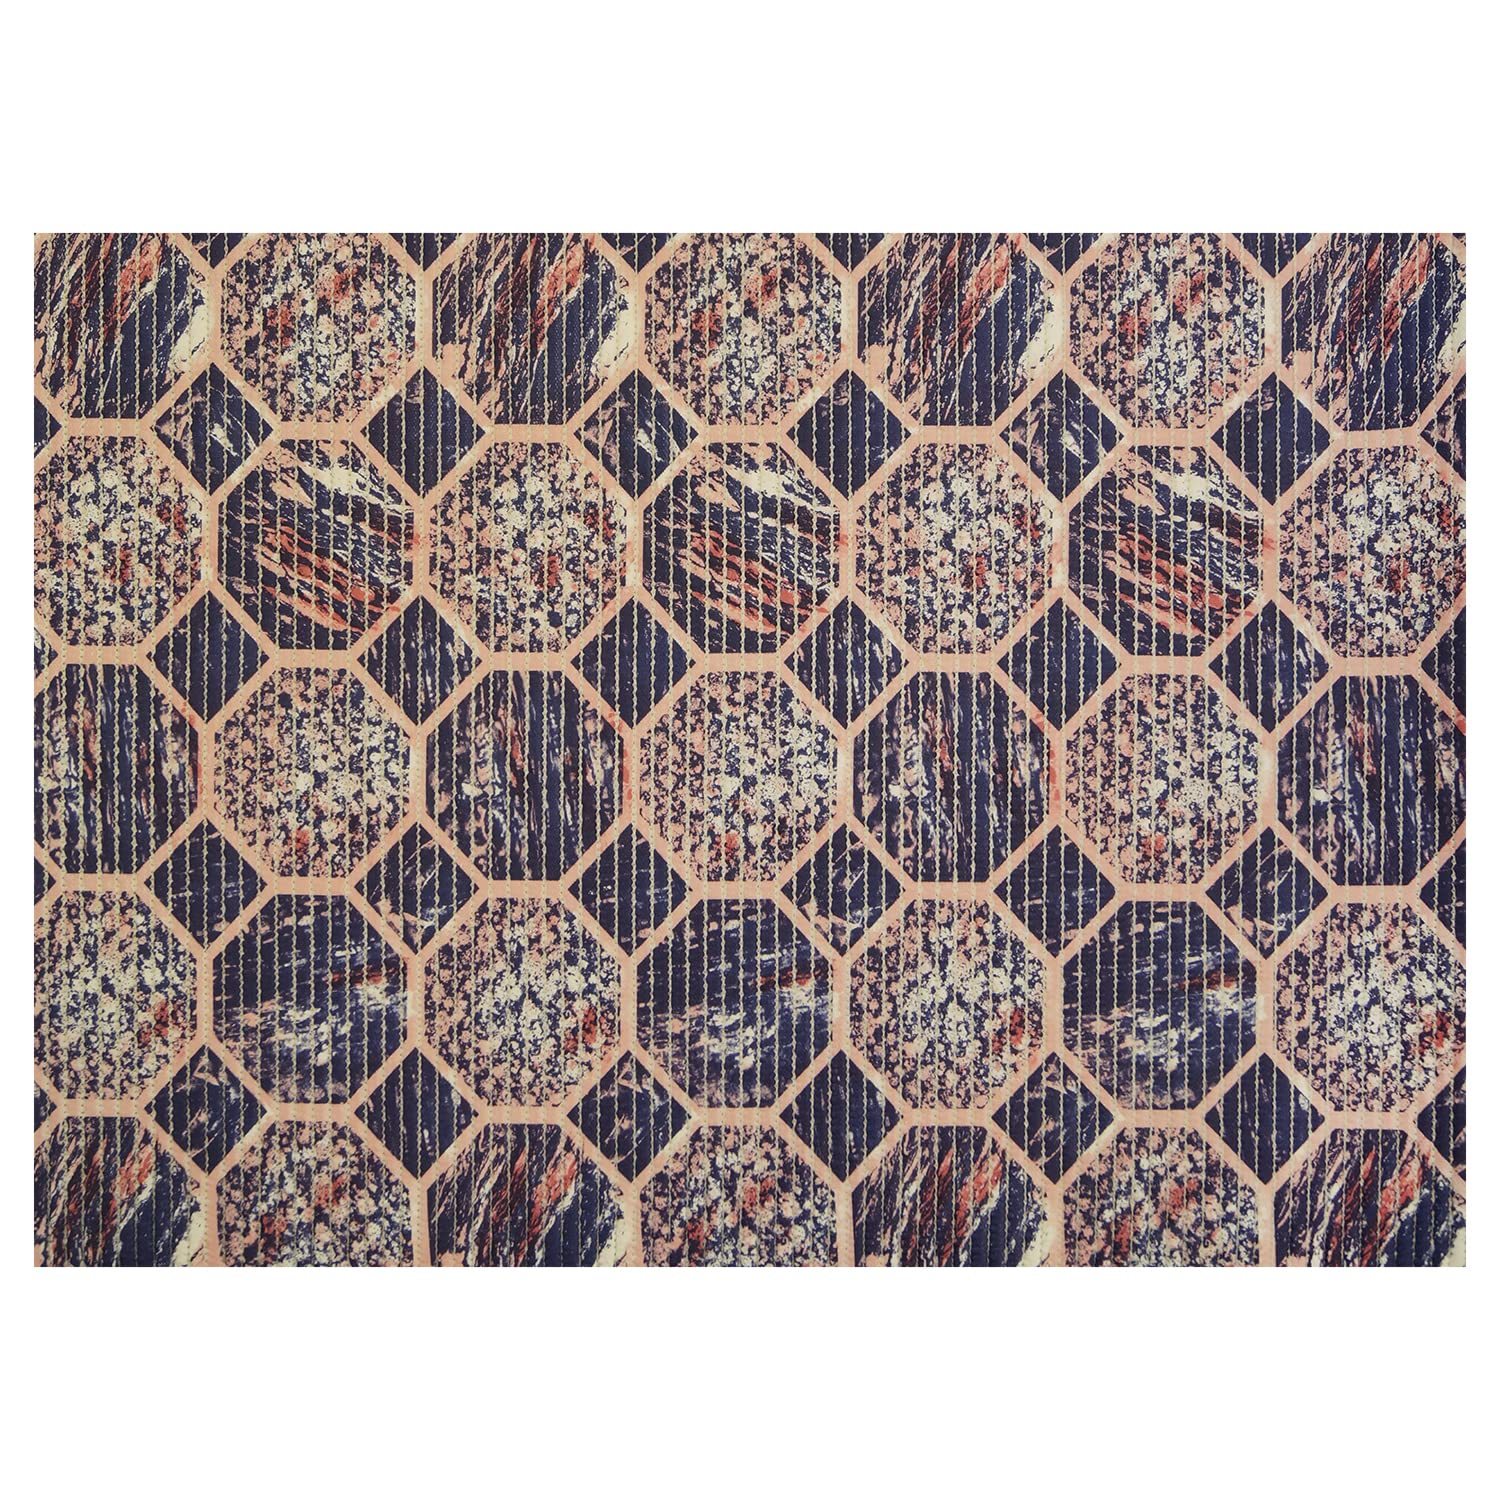 Primary image for Dundee Deco Octagon Bathroom Mat - 35" x 26" Purple Waterproof Non-Slip Quick Dr